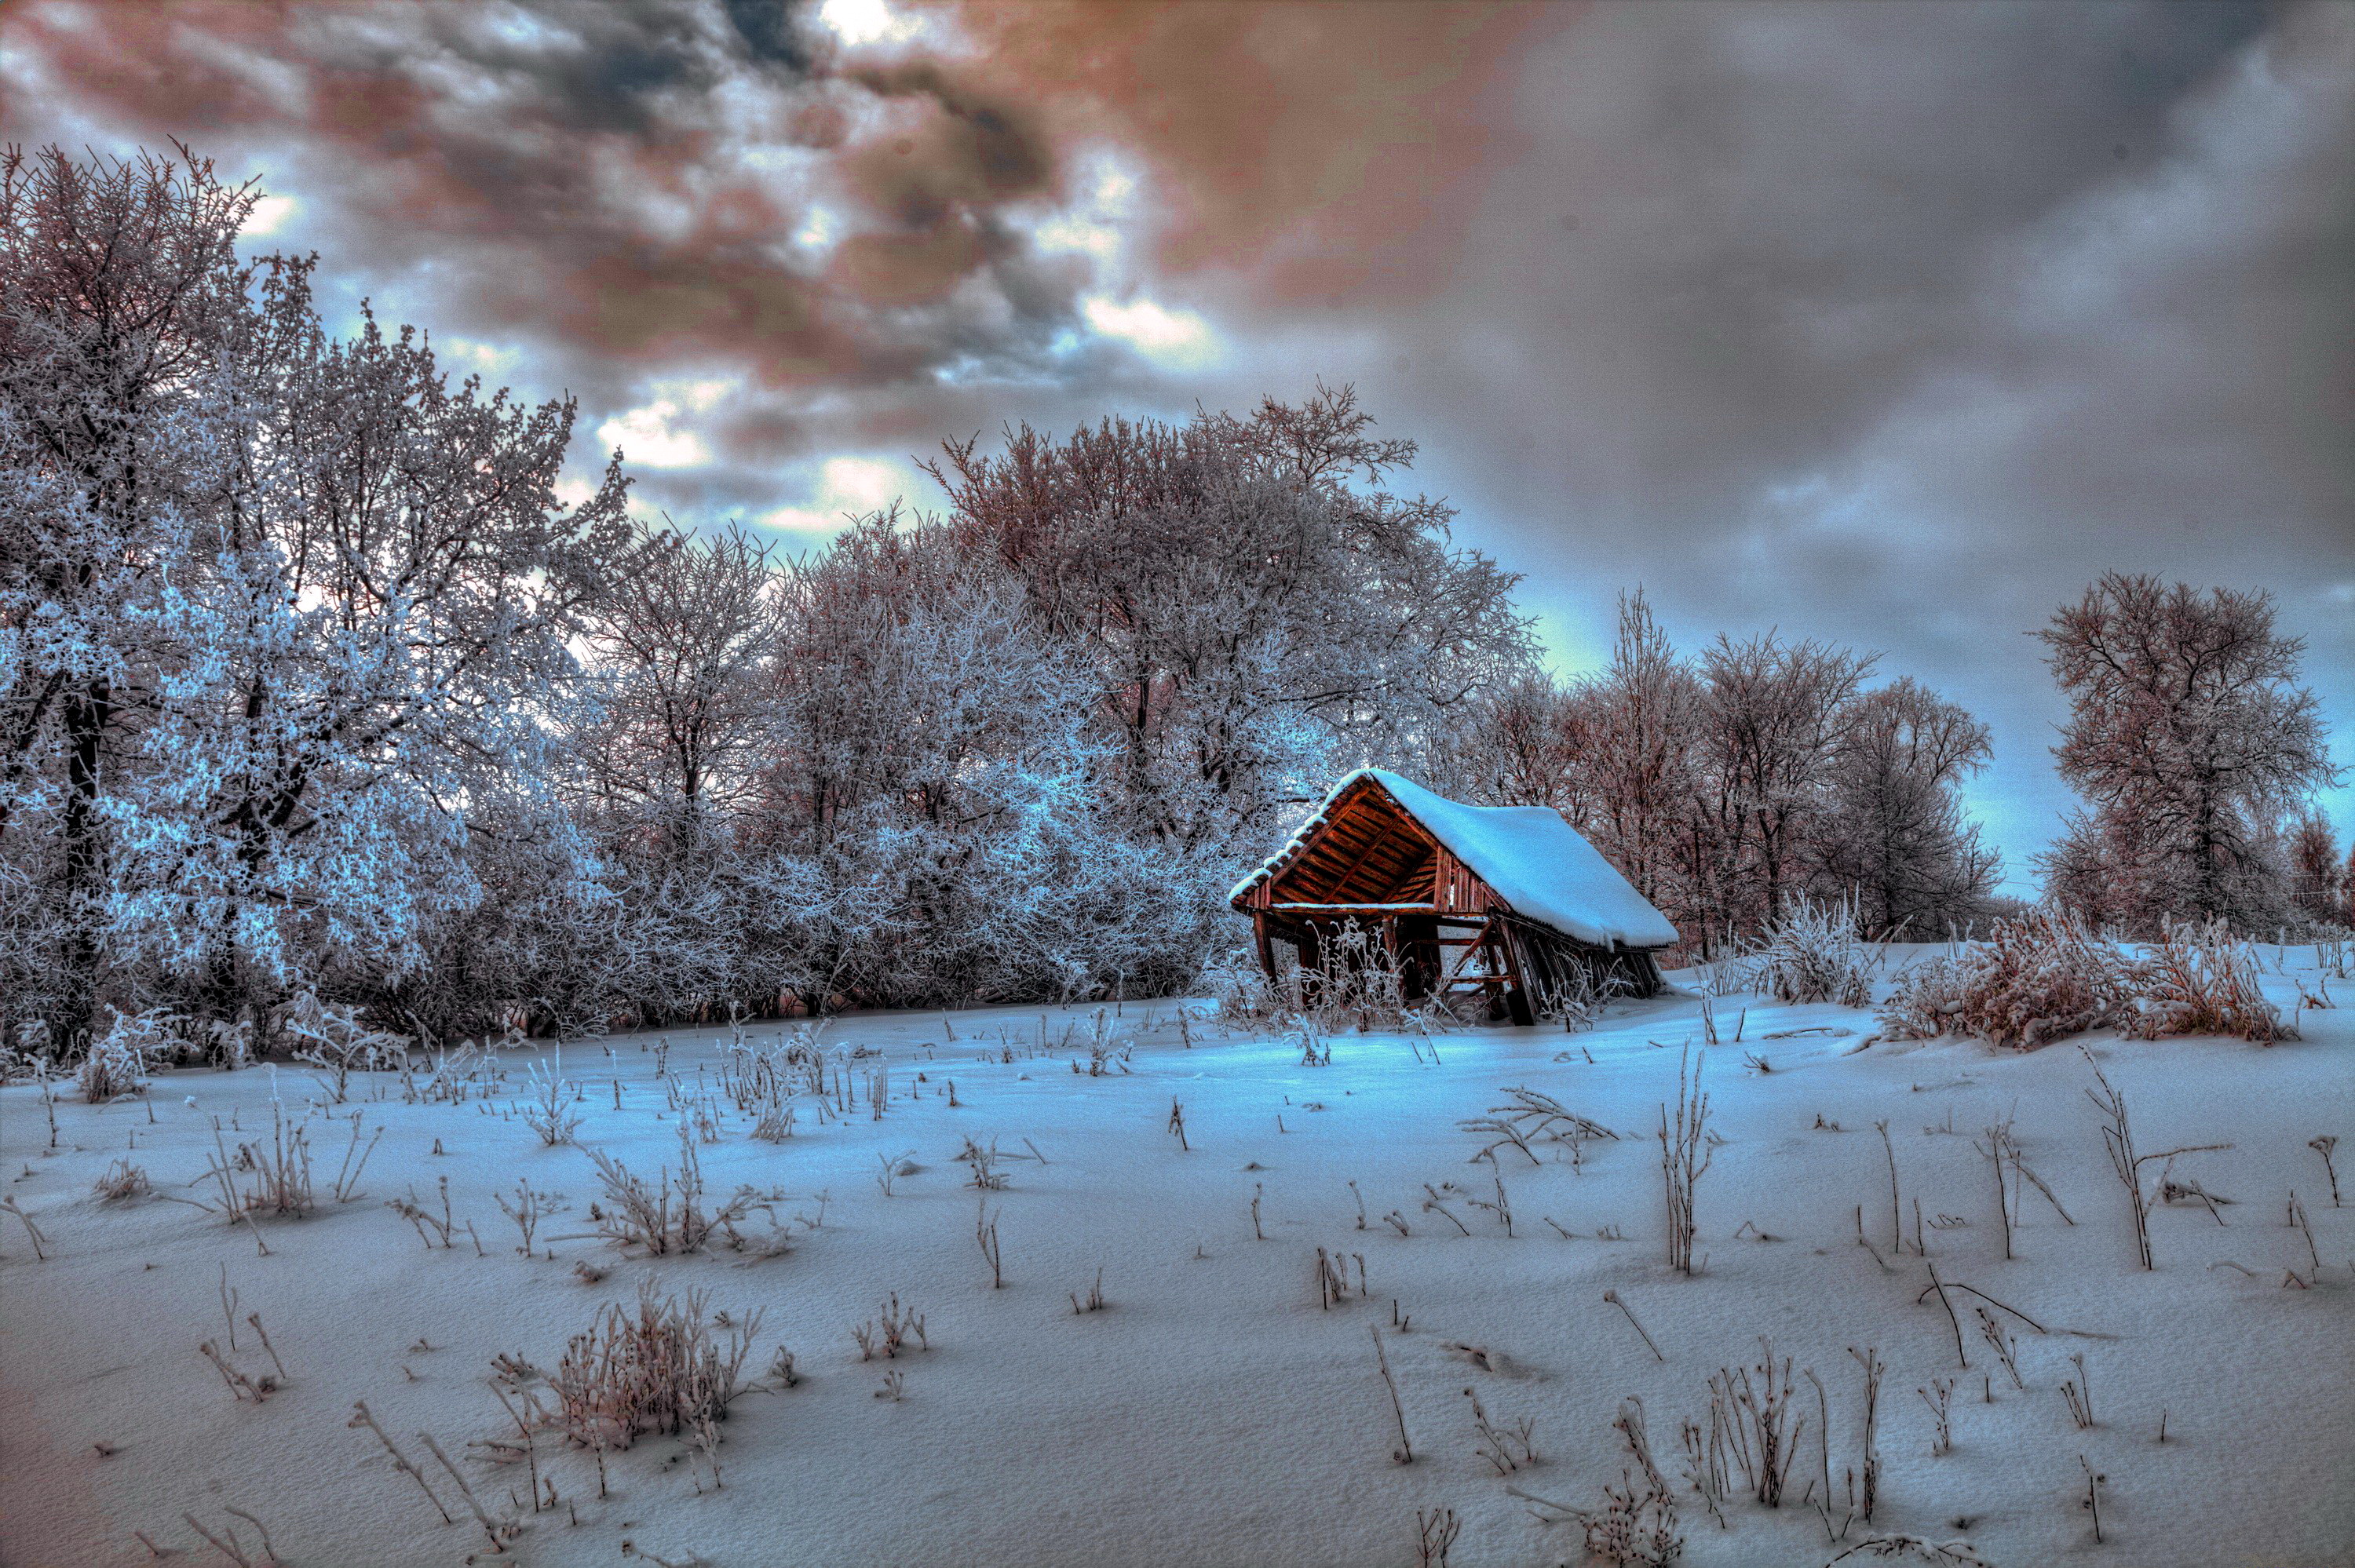 Winter Clouds over Old Shack